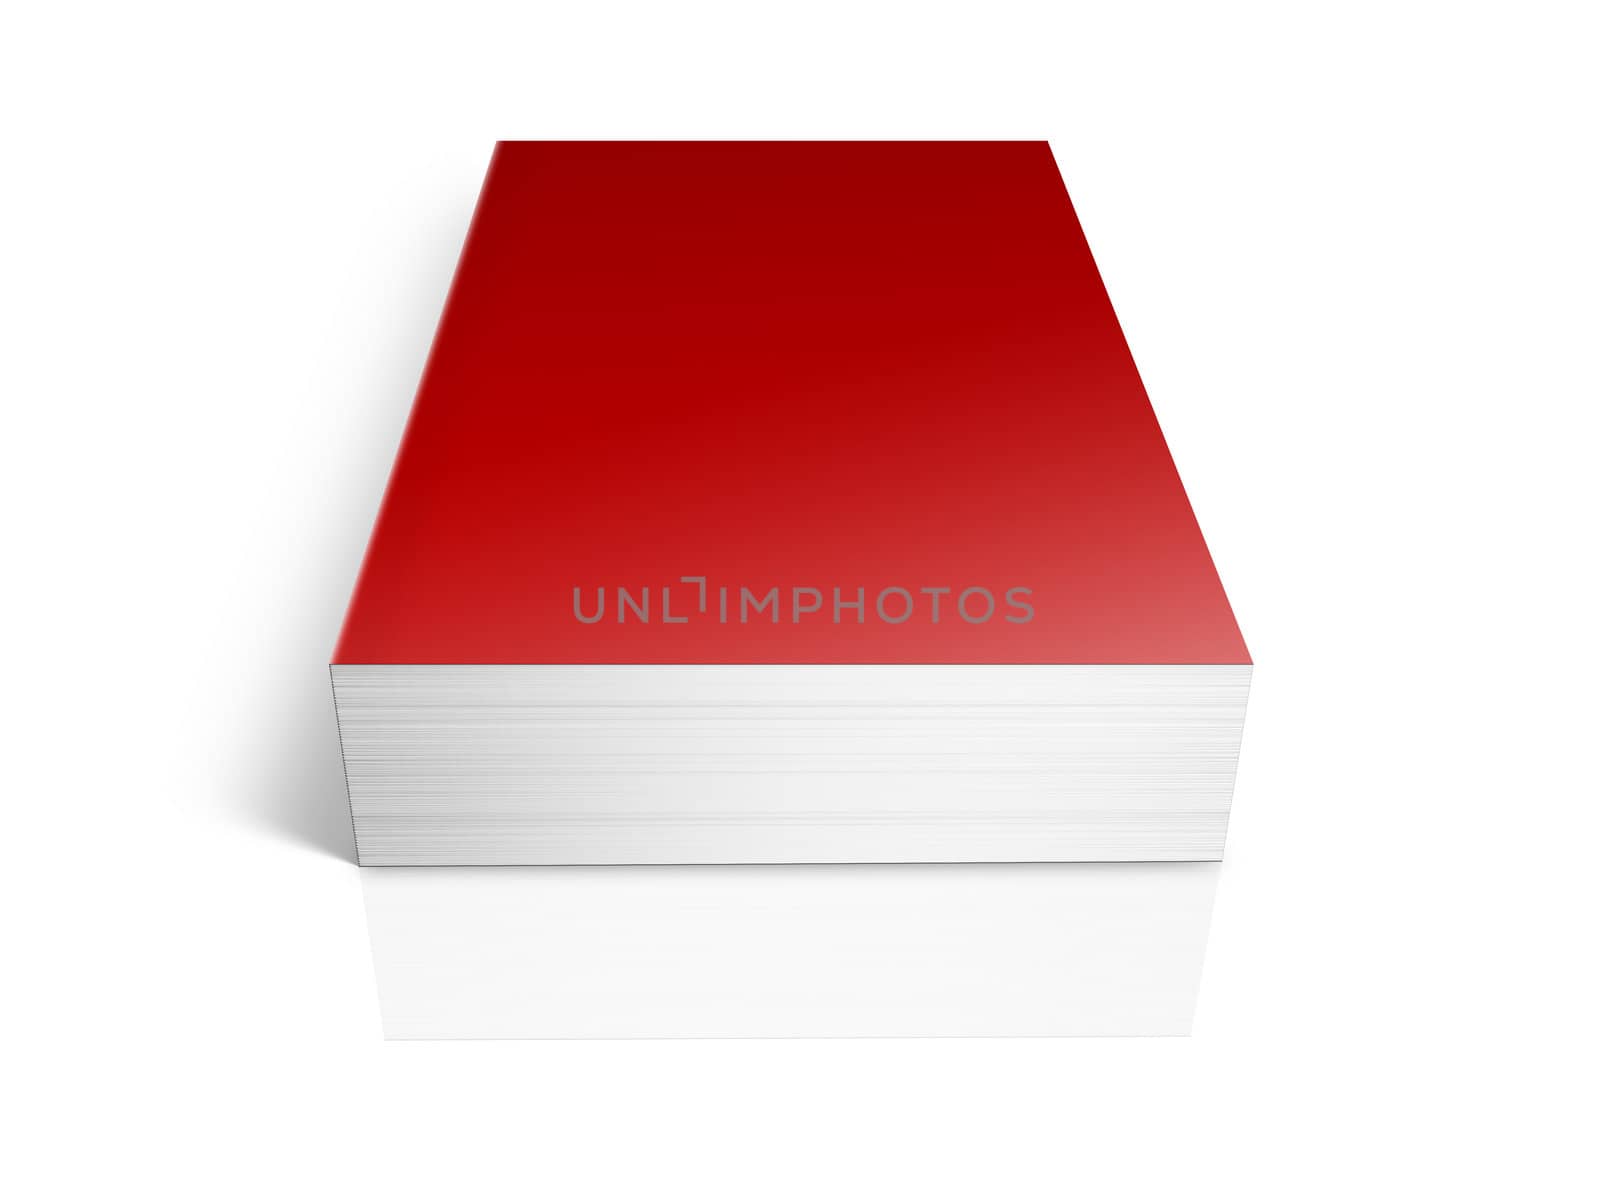 big red perspective book with shadows isolated on white background